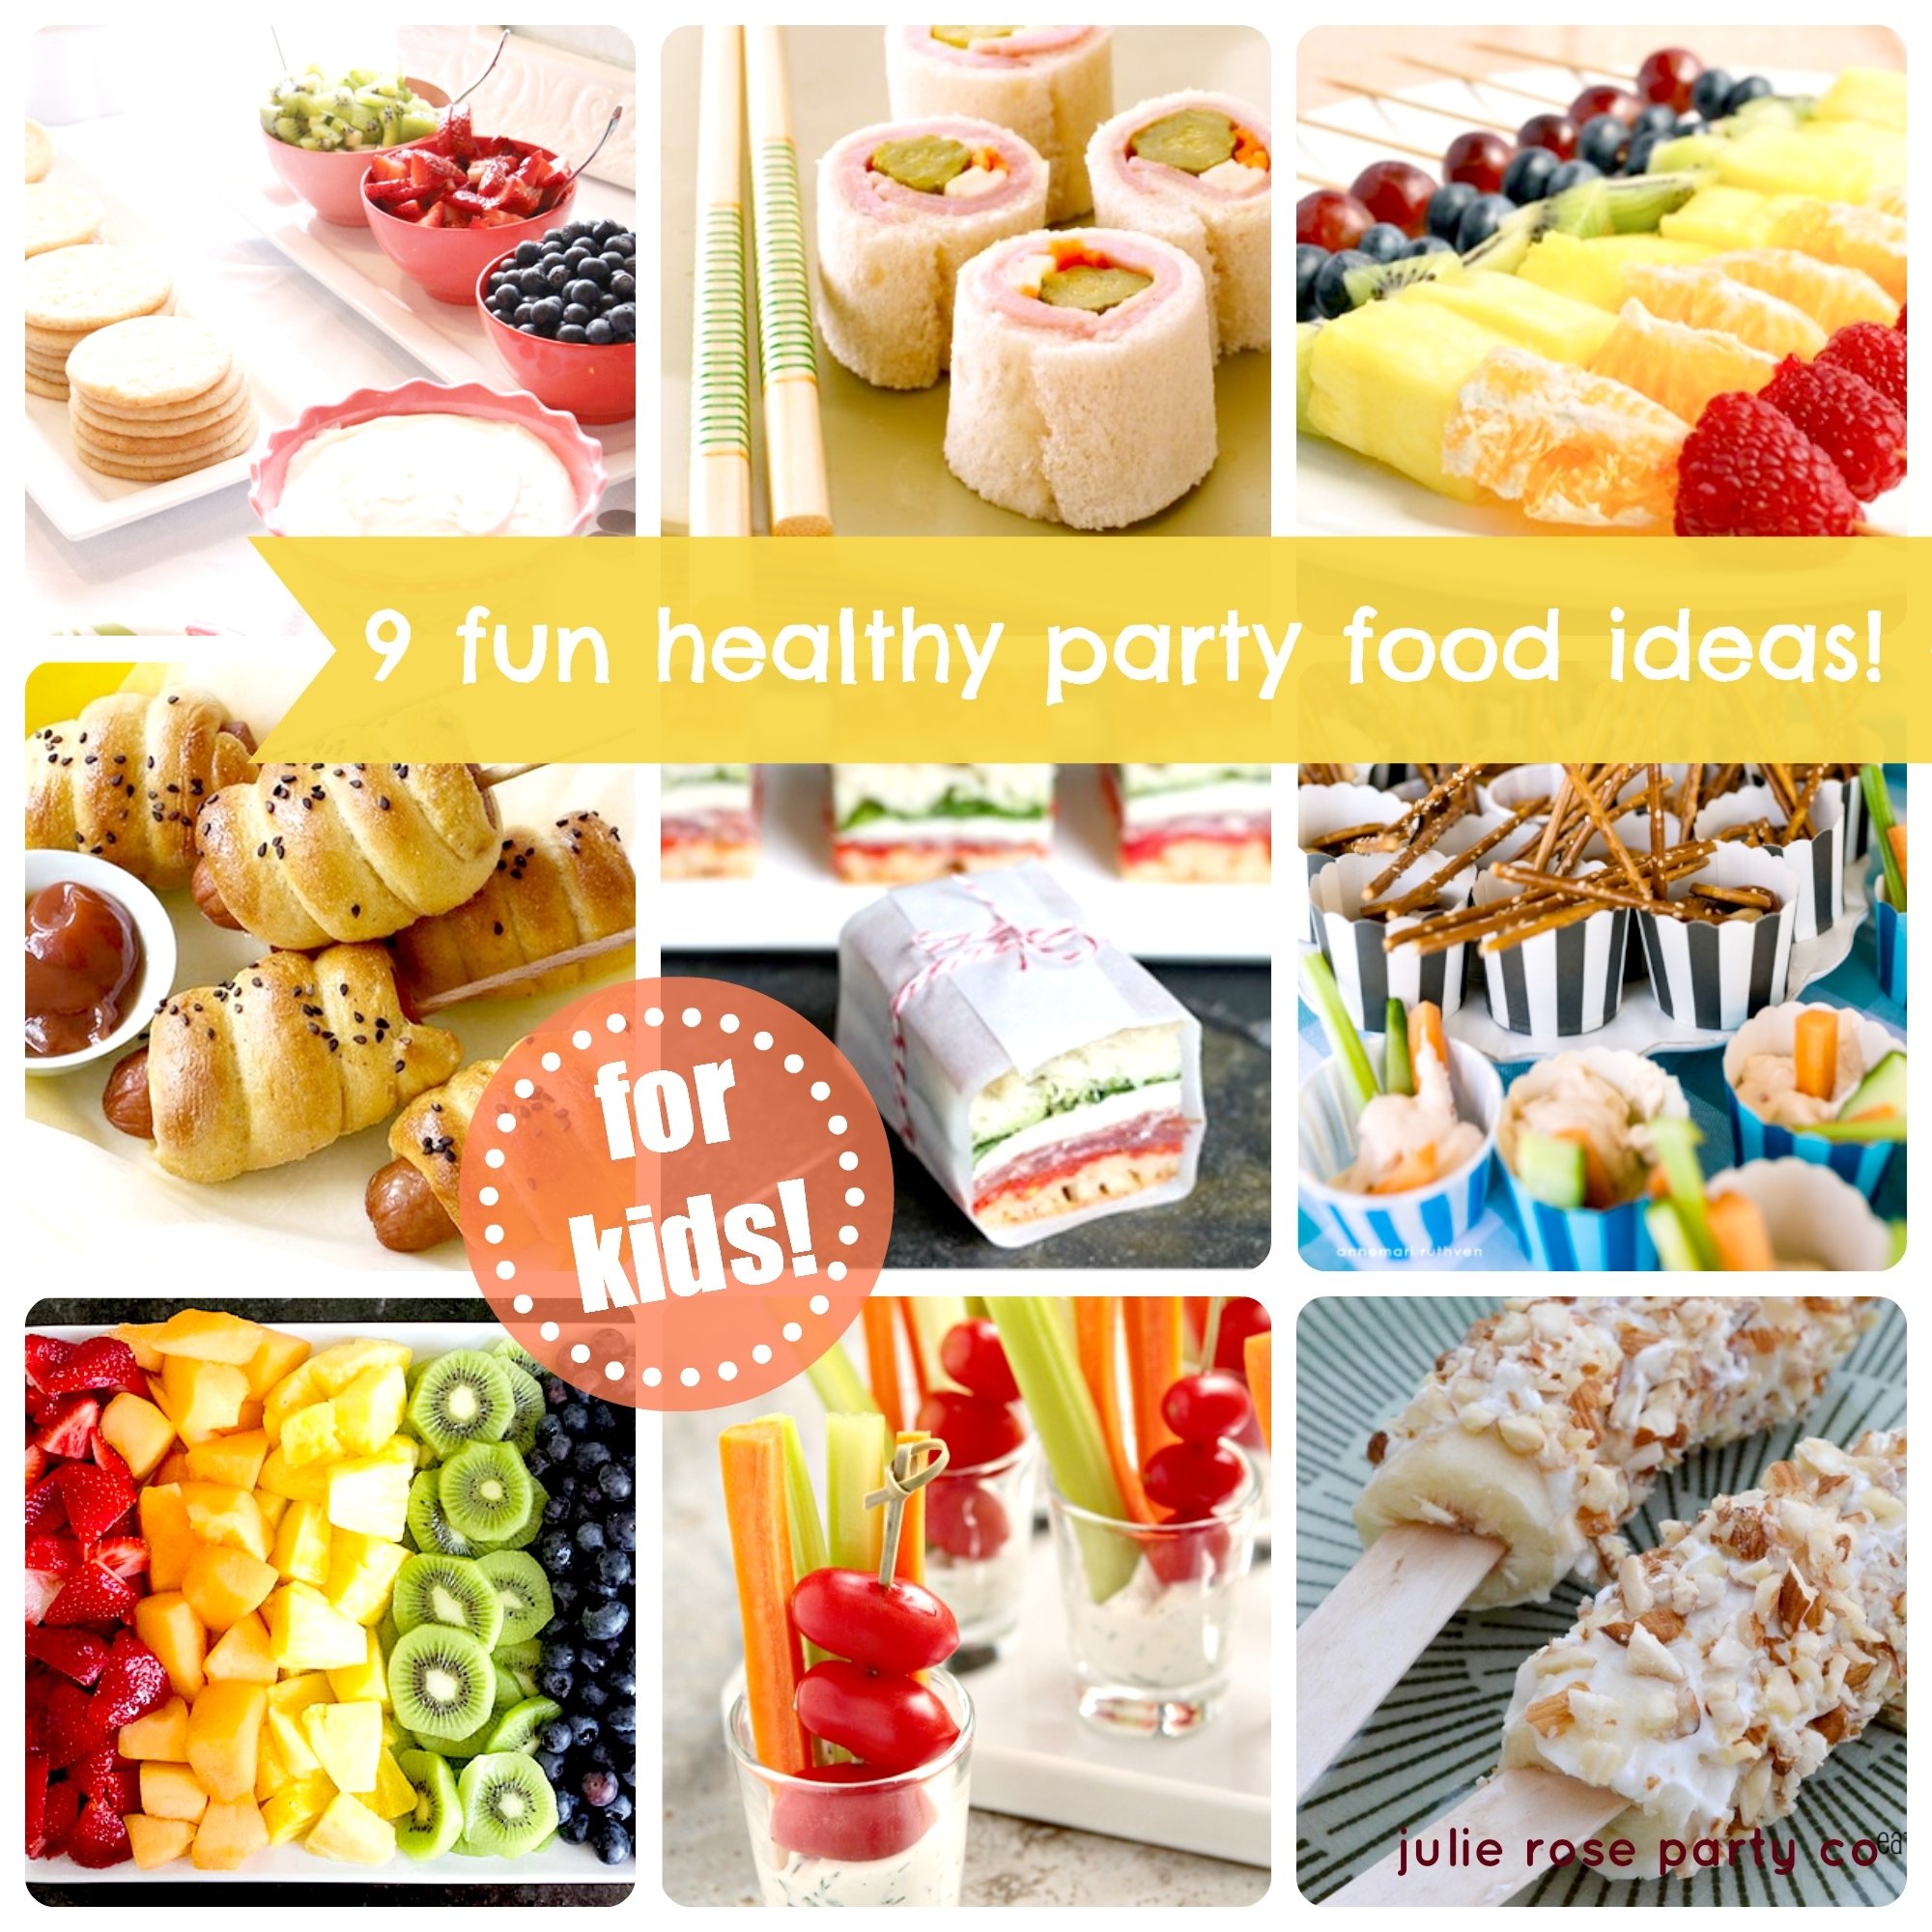 10 Stunning Easy Food Ideas For Parties 9 fun and healthy party food ideas kids julie rose party co 2022